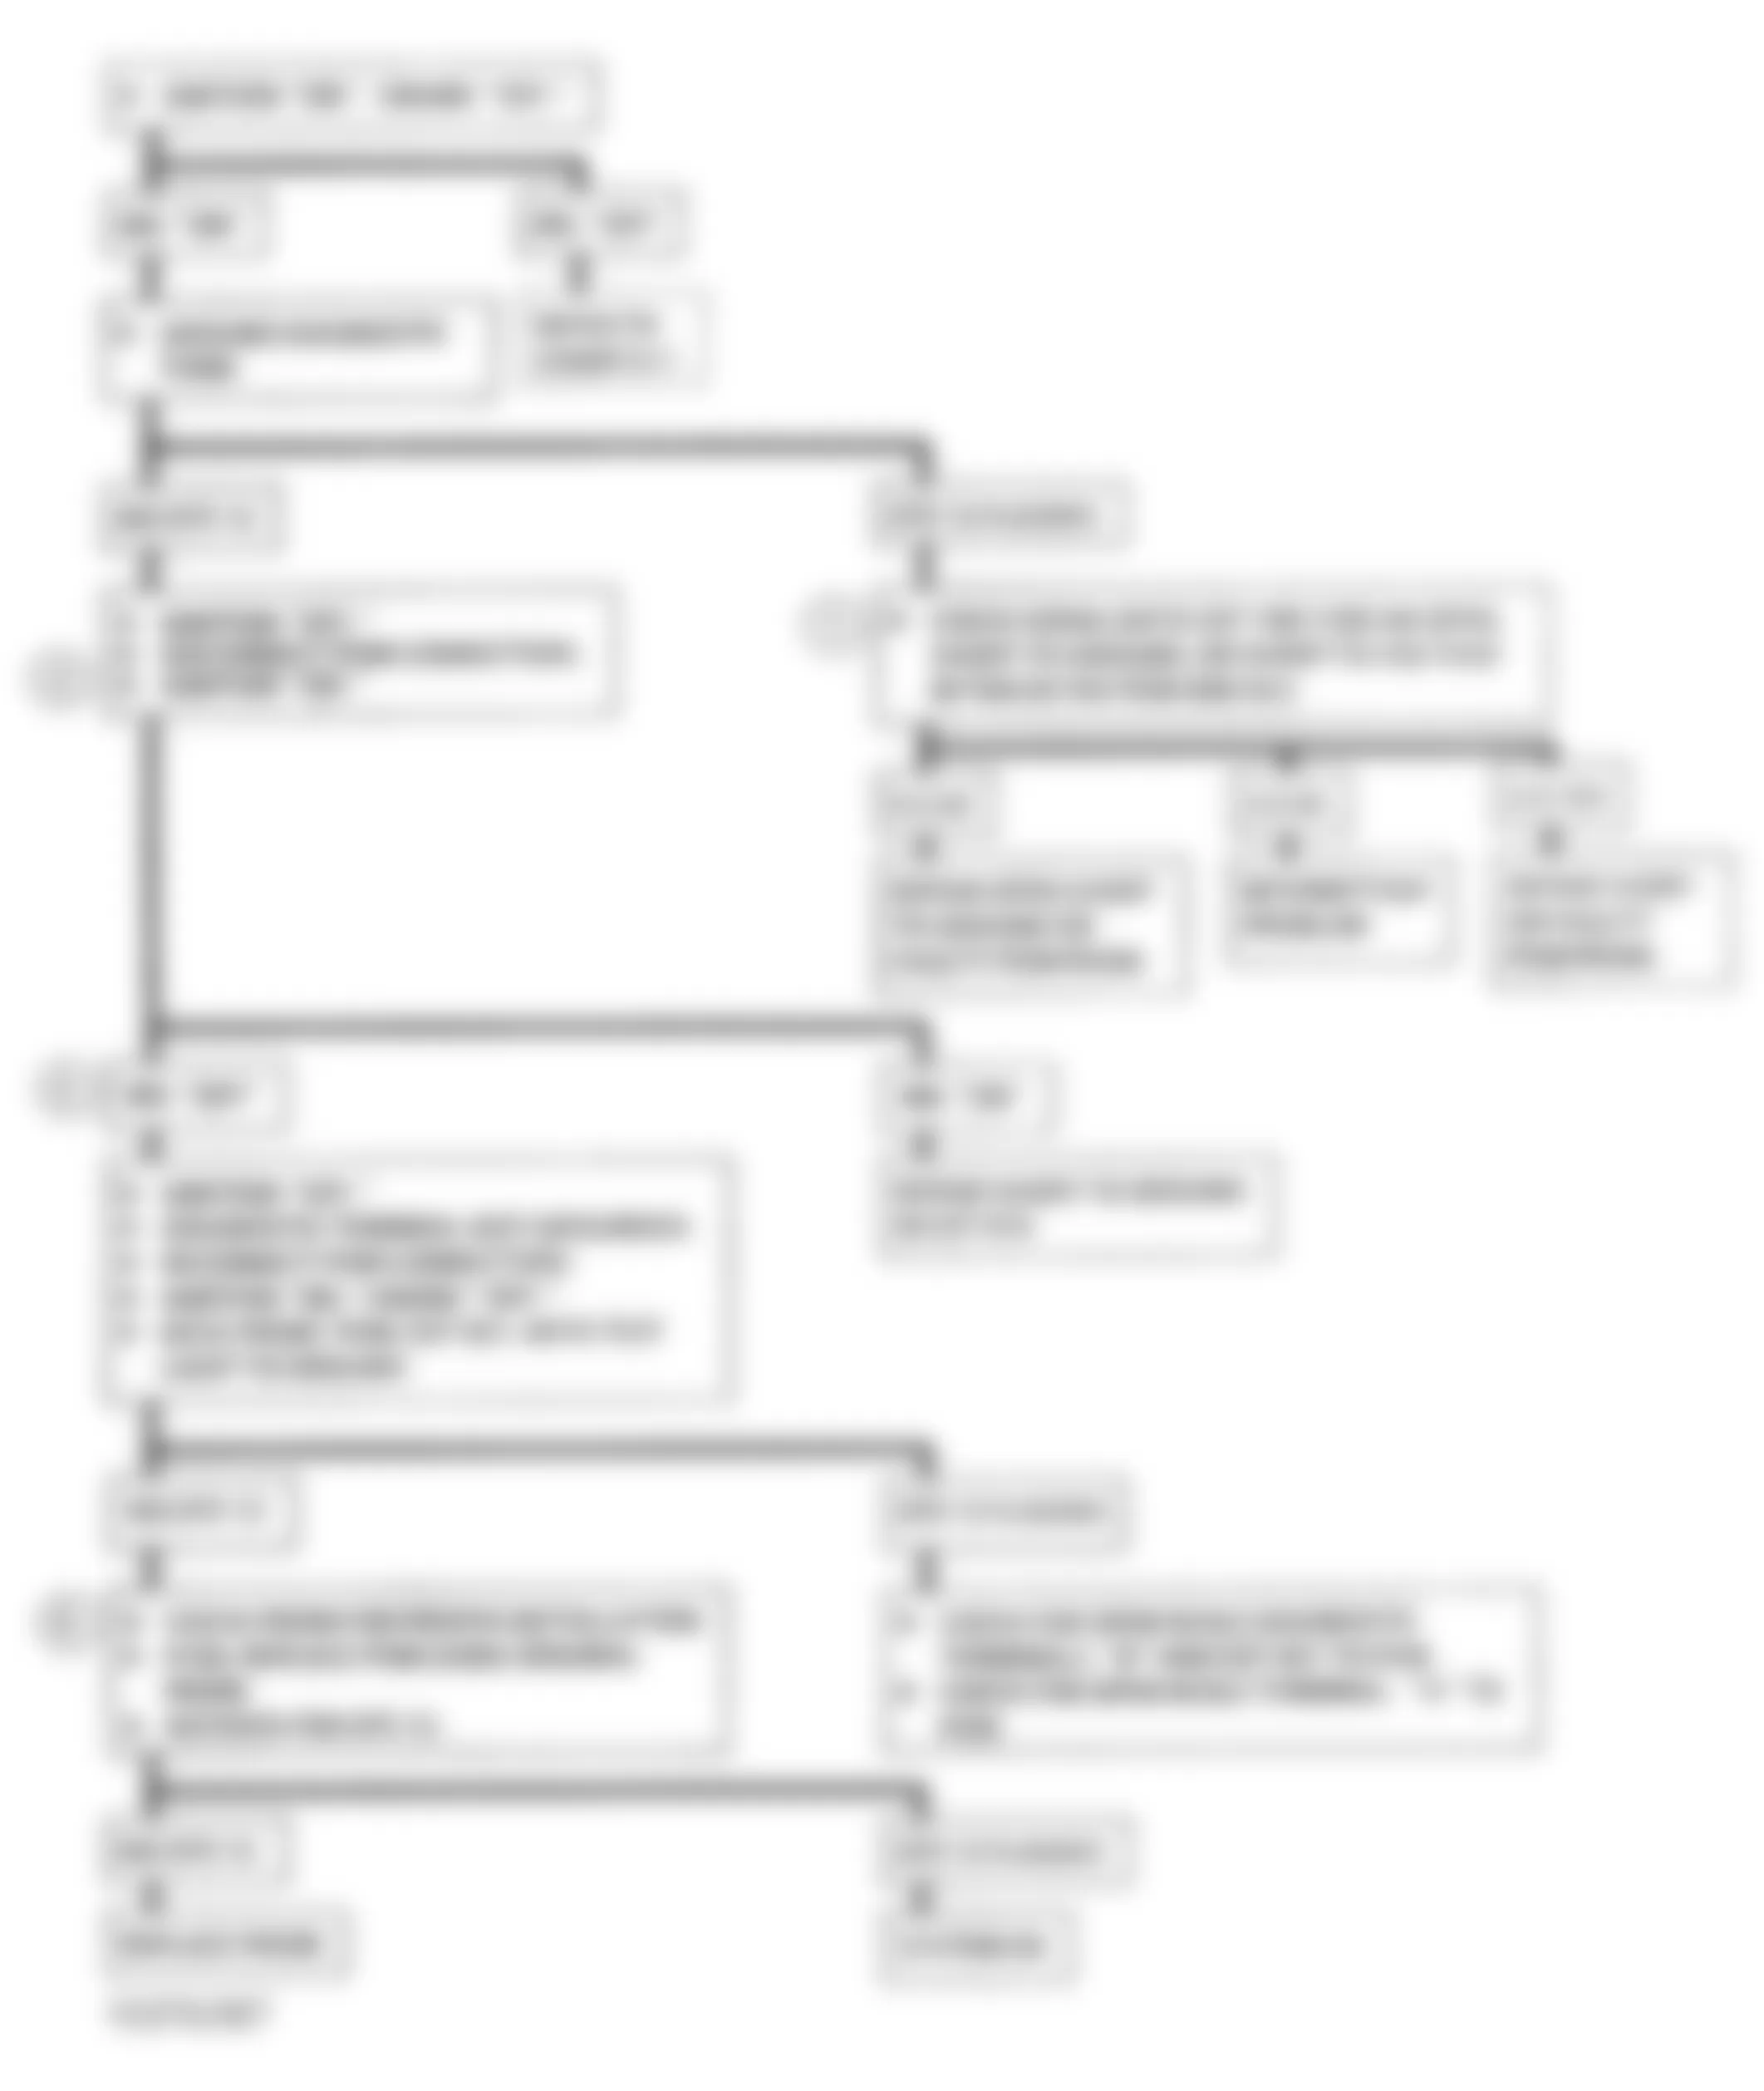 GMC Pickup K1500 1993 - Component Locations -  A-2, Flowchart, No DLC Data, MIL On All Time - A/T